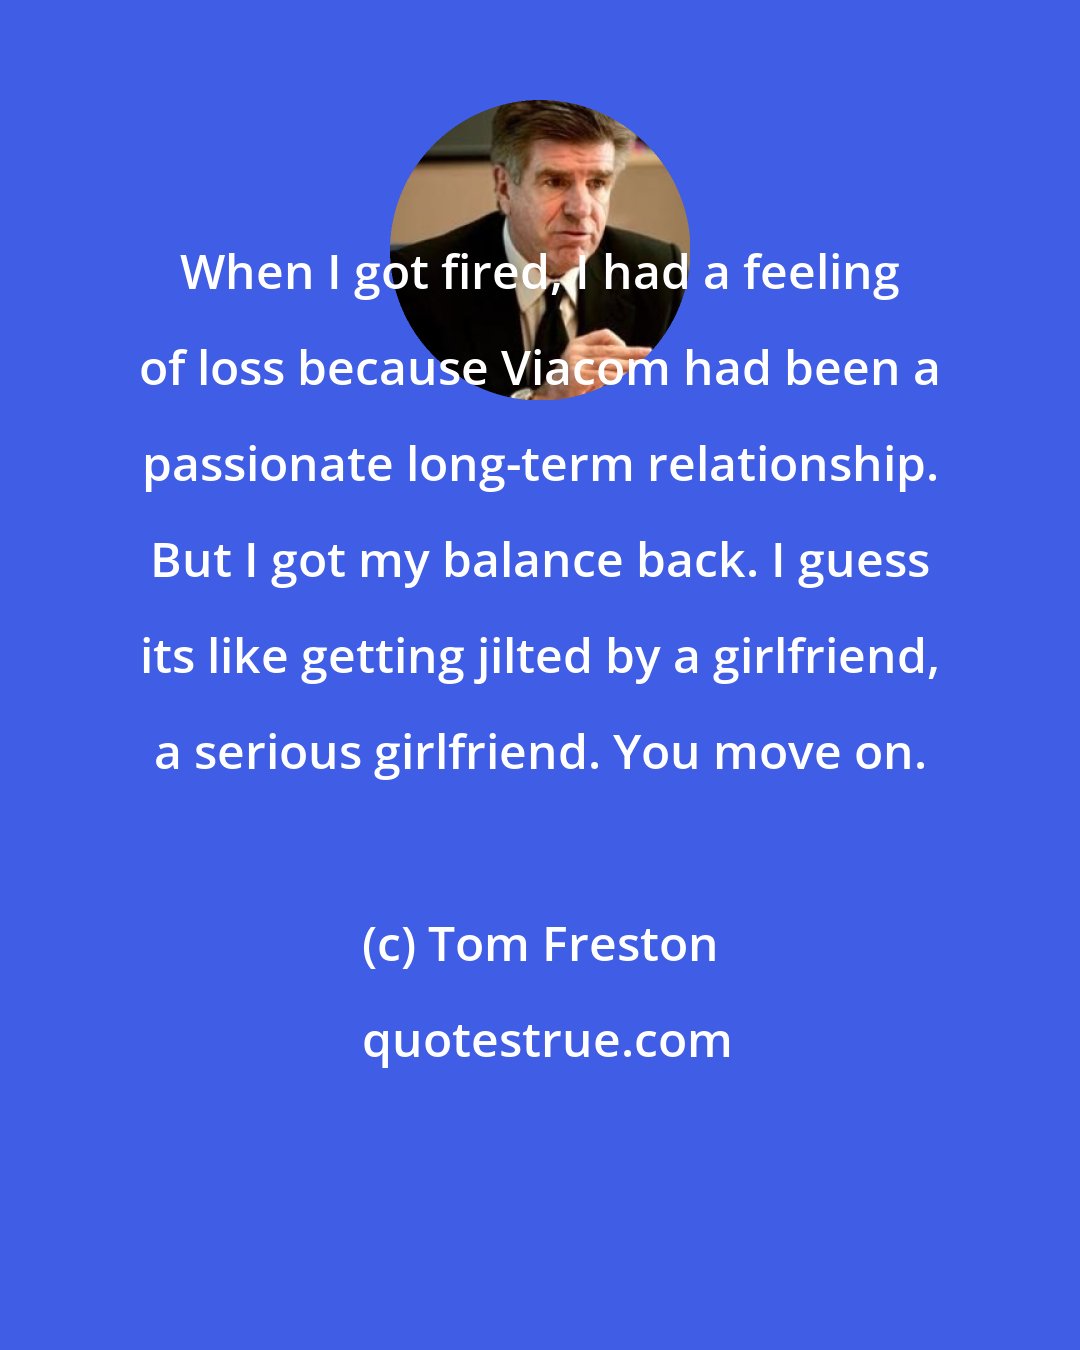 Tom Freston: When I got fired, I had a feeling of loss because Viacom had been a passionate long-term relationship. But I got my balance back. I guess its like getting jilted by a girlfriend, a serious girlfriend. You move on.